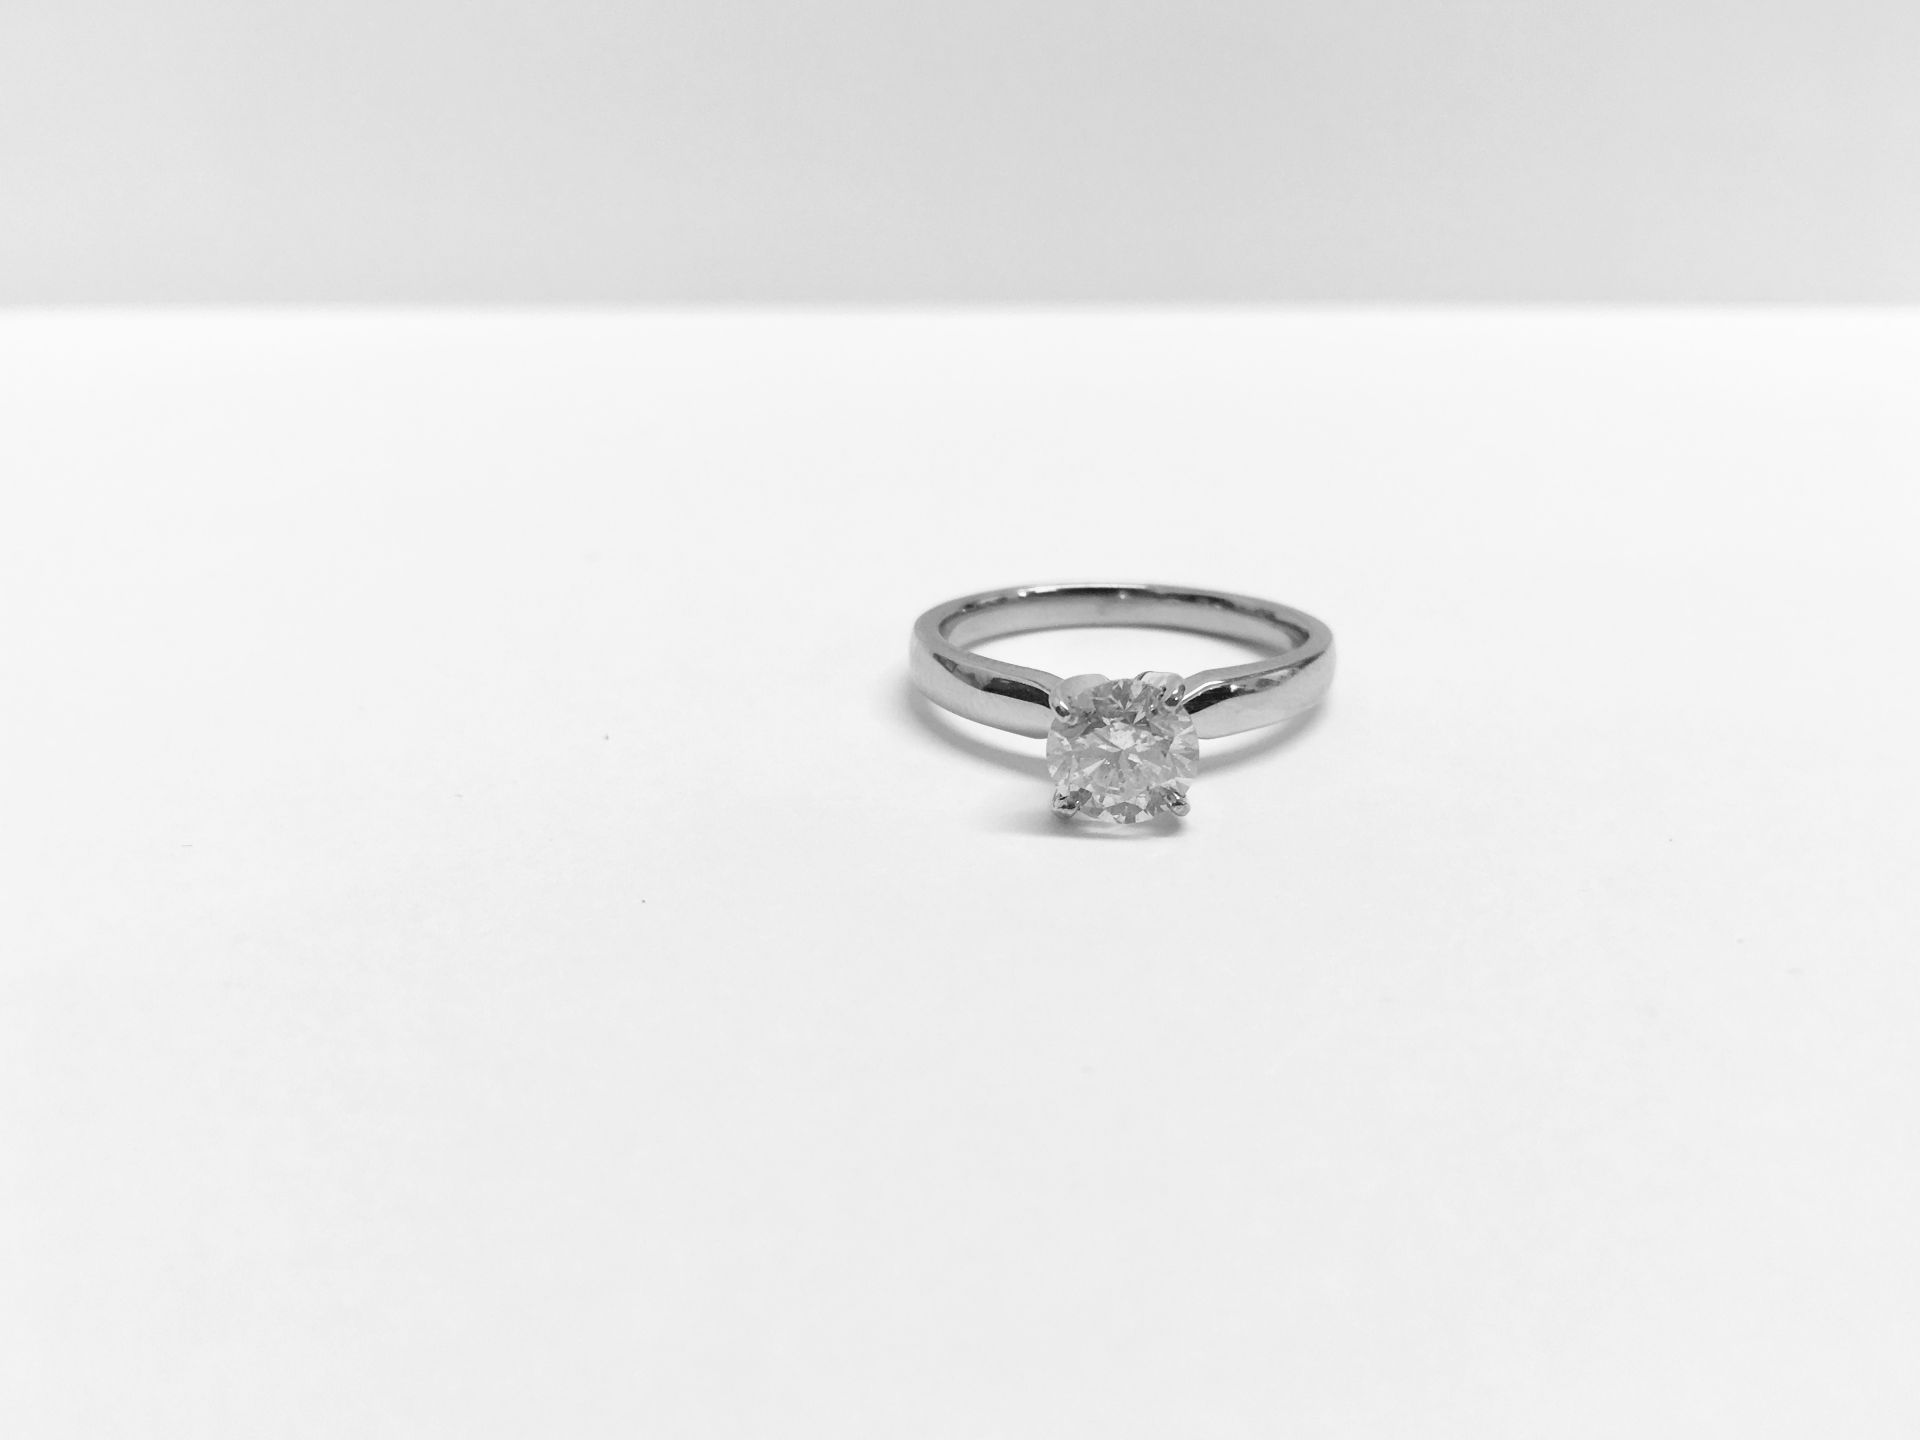 1.15ct diamond solitaire ring set in 18ct white gold. H colour and SI2 clarity. 4 claw setting.